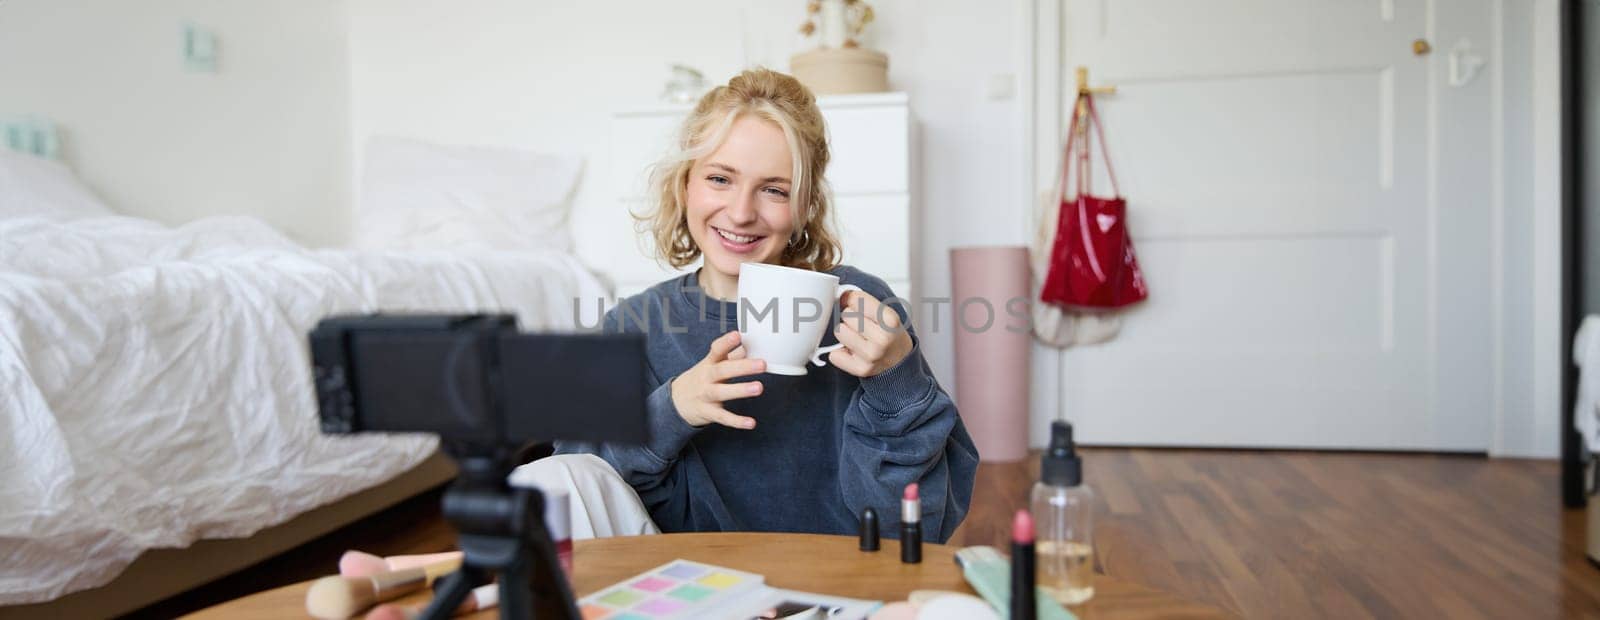 Cheerful woman, beauty blogger, records lifestyle vlog on digital camera, talks casually, tells a story for social media followers, holds cup, drinks tea and sits on floor in her room.